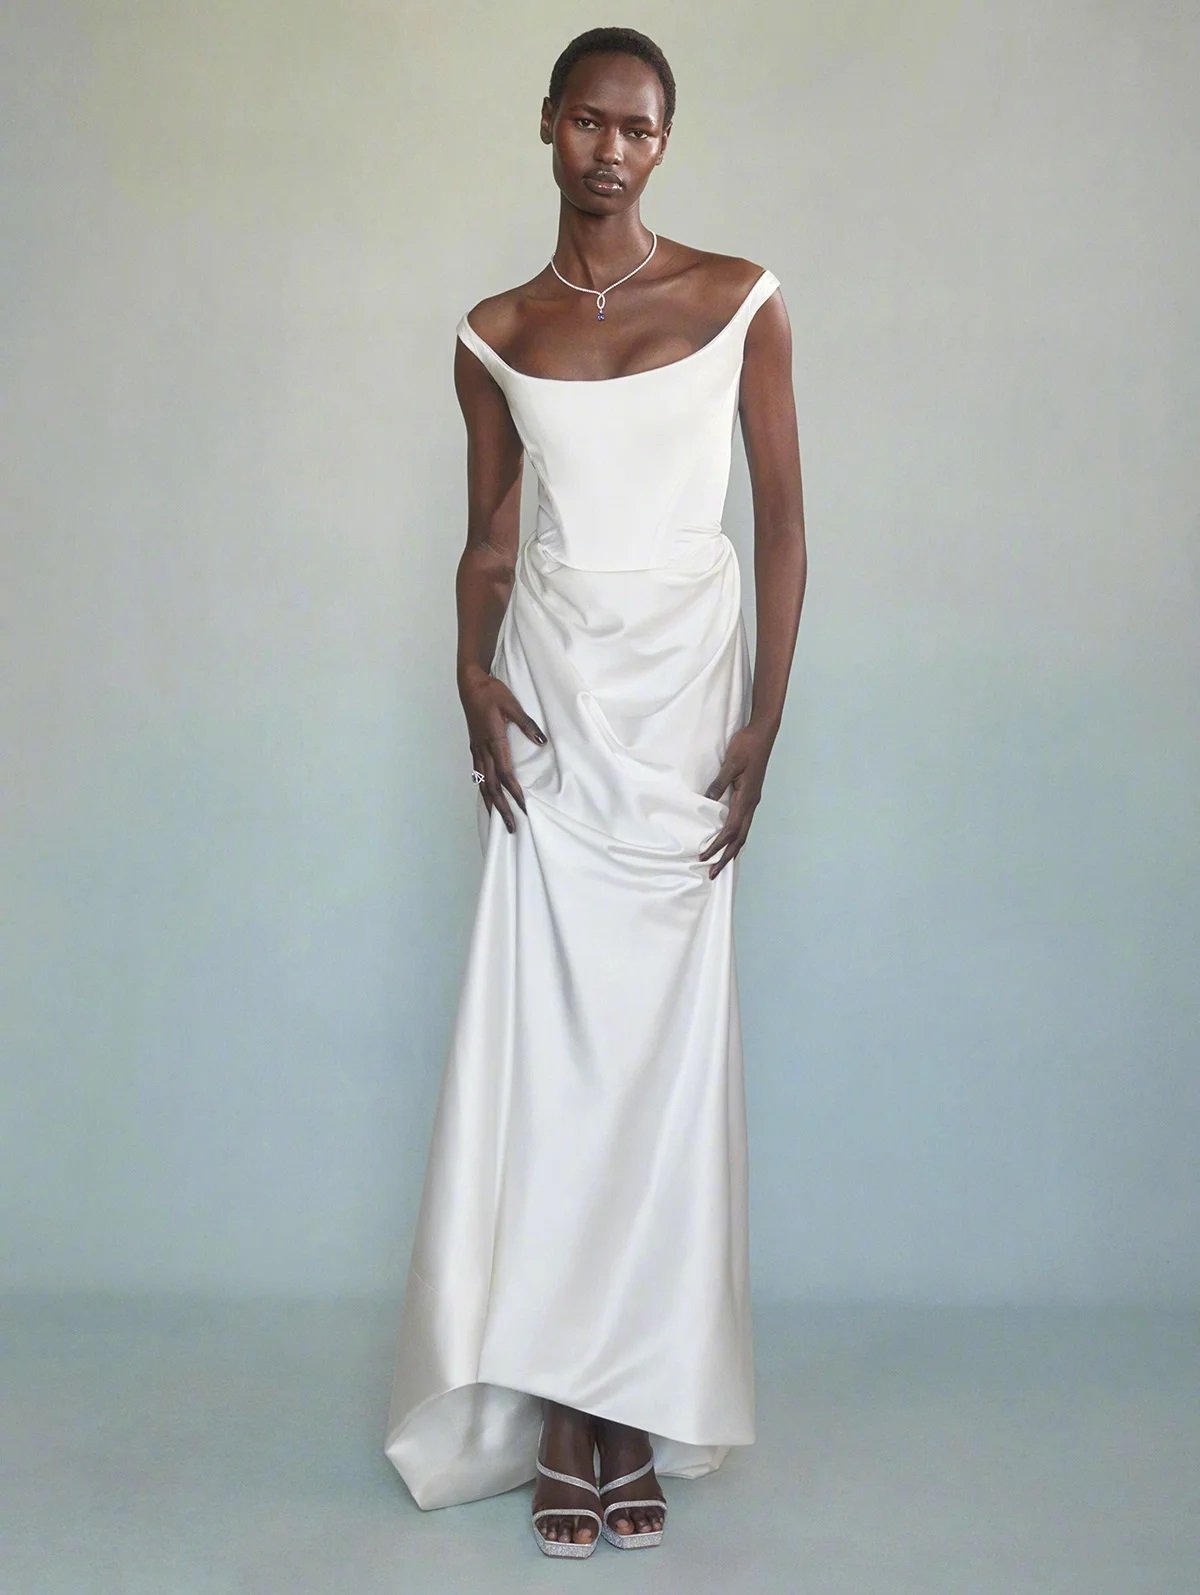 Nyarach-Abouch-Ayuel-covers-British-Vogue-Weddings-May-2022-by-Emma-Tempest-3.jpg